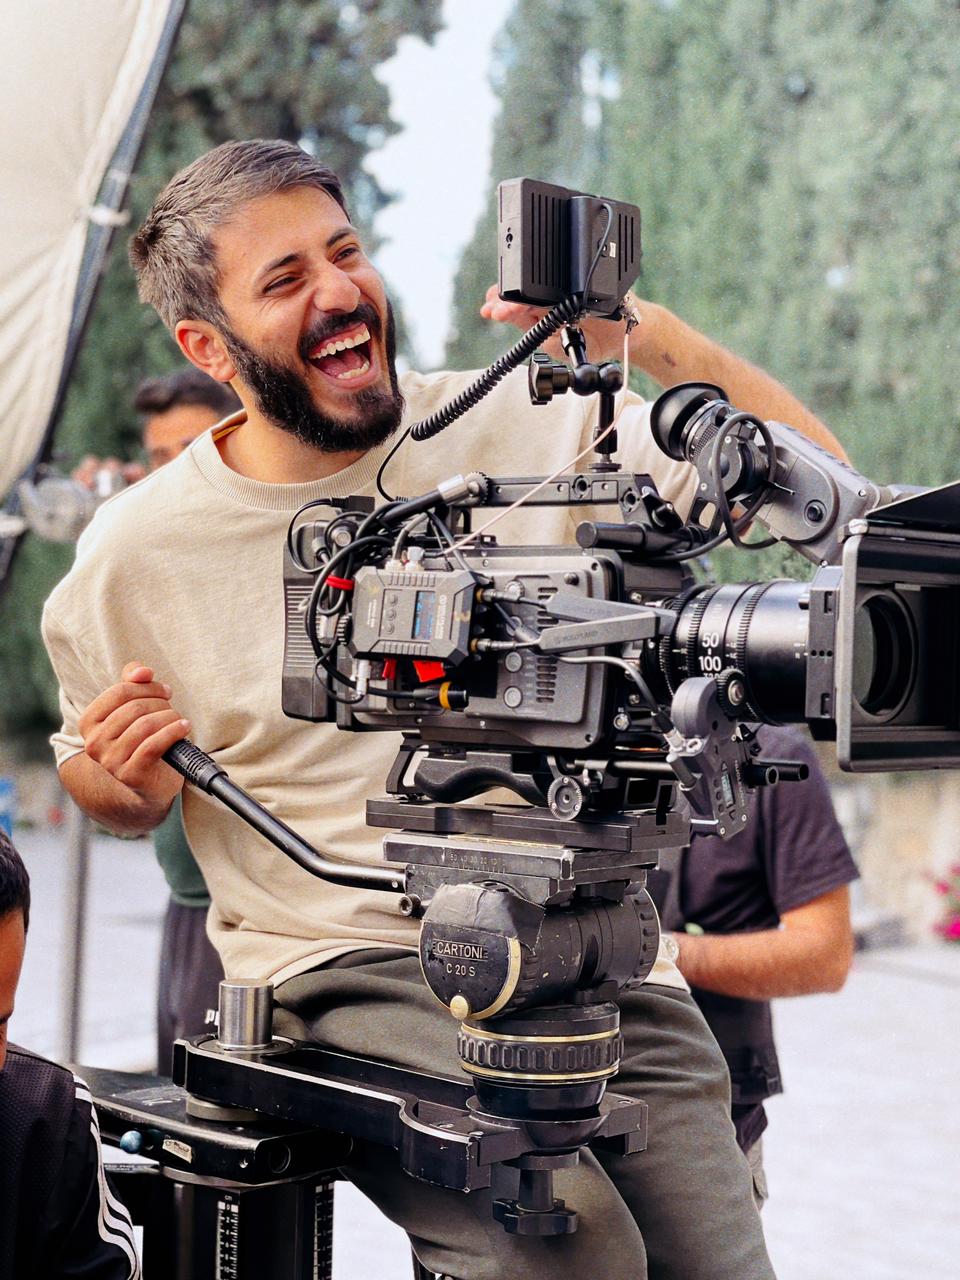 “A decent film is the one, wherein the group is cheerful on the set” – Omar Rammal